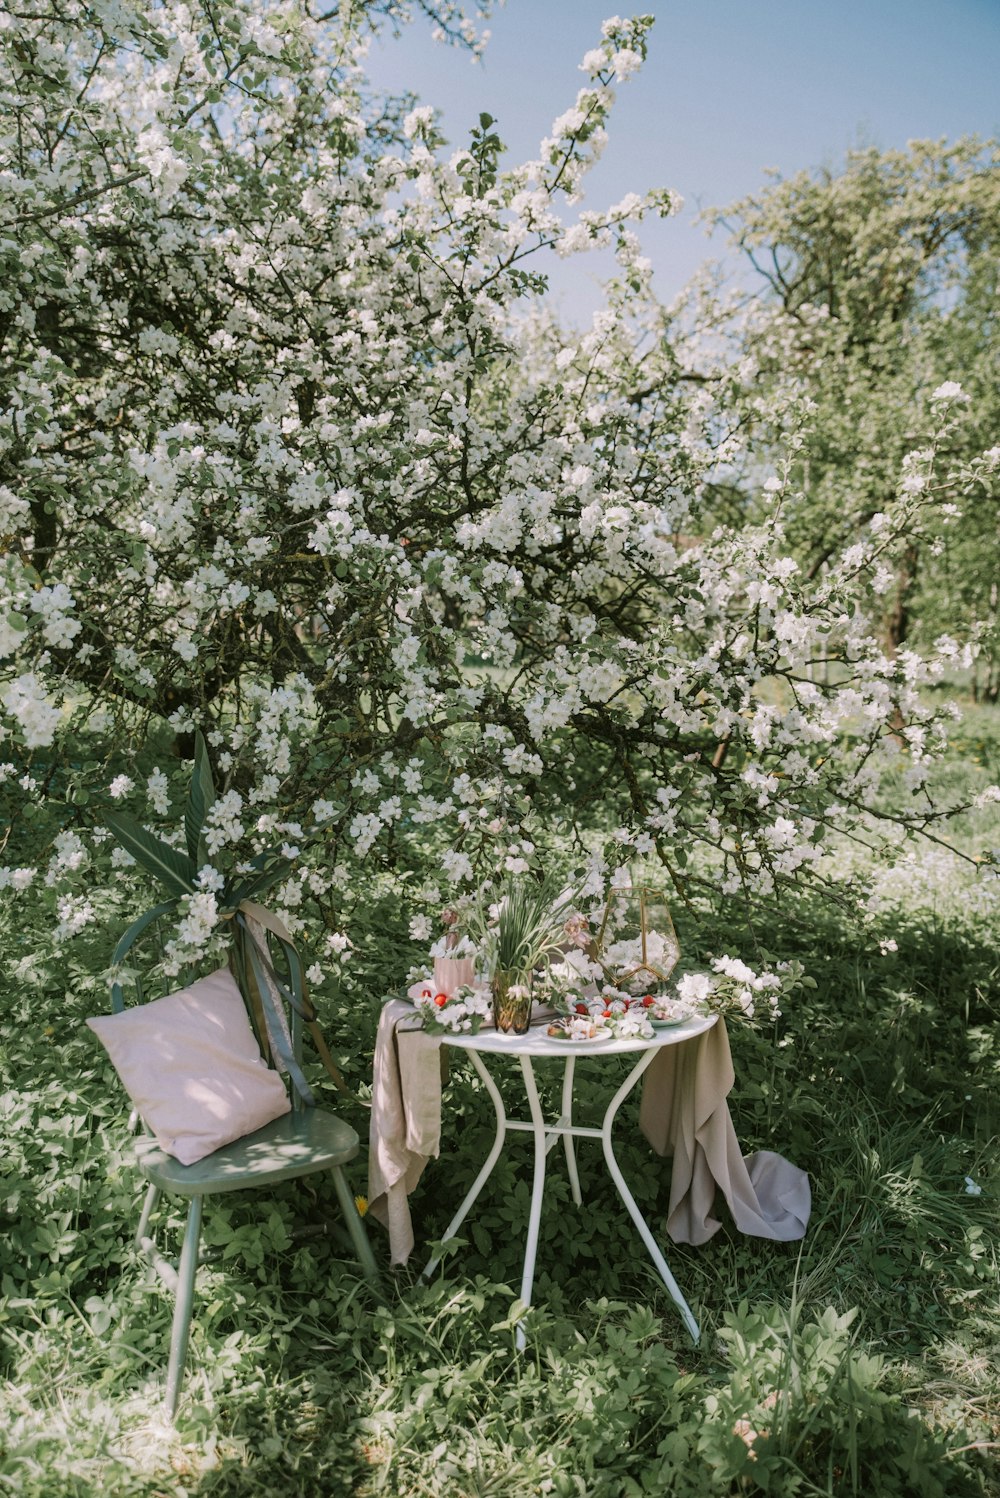 a table and chairs in the grass under a tree